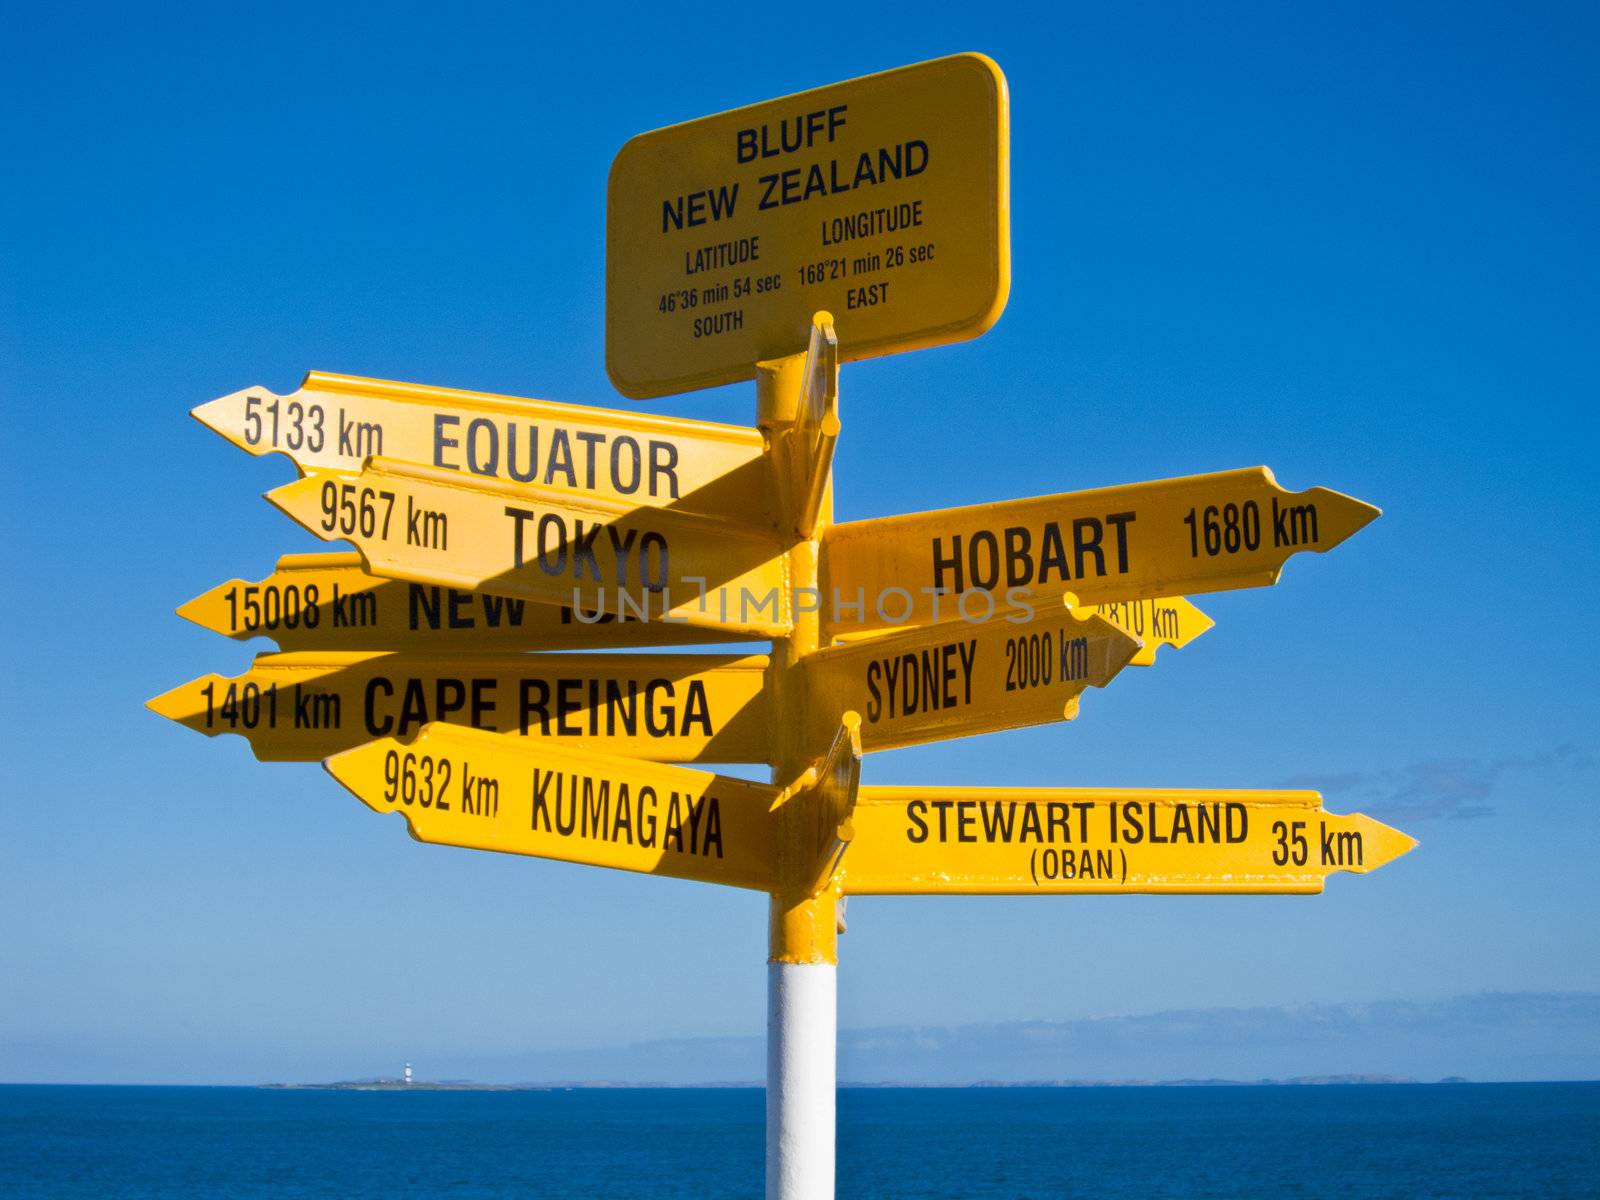 Signpost in Sterling point Bluff, South island of New Zealand